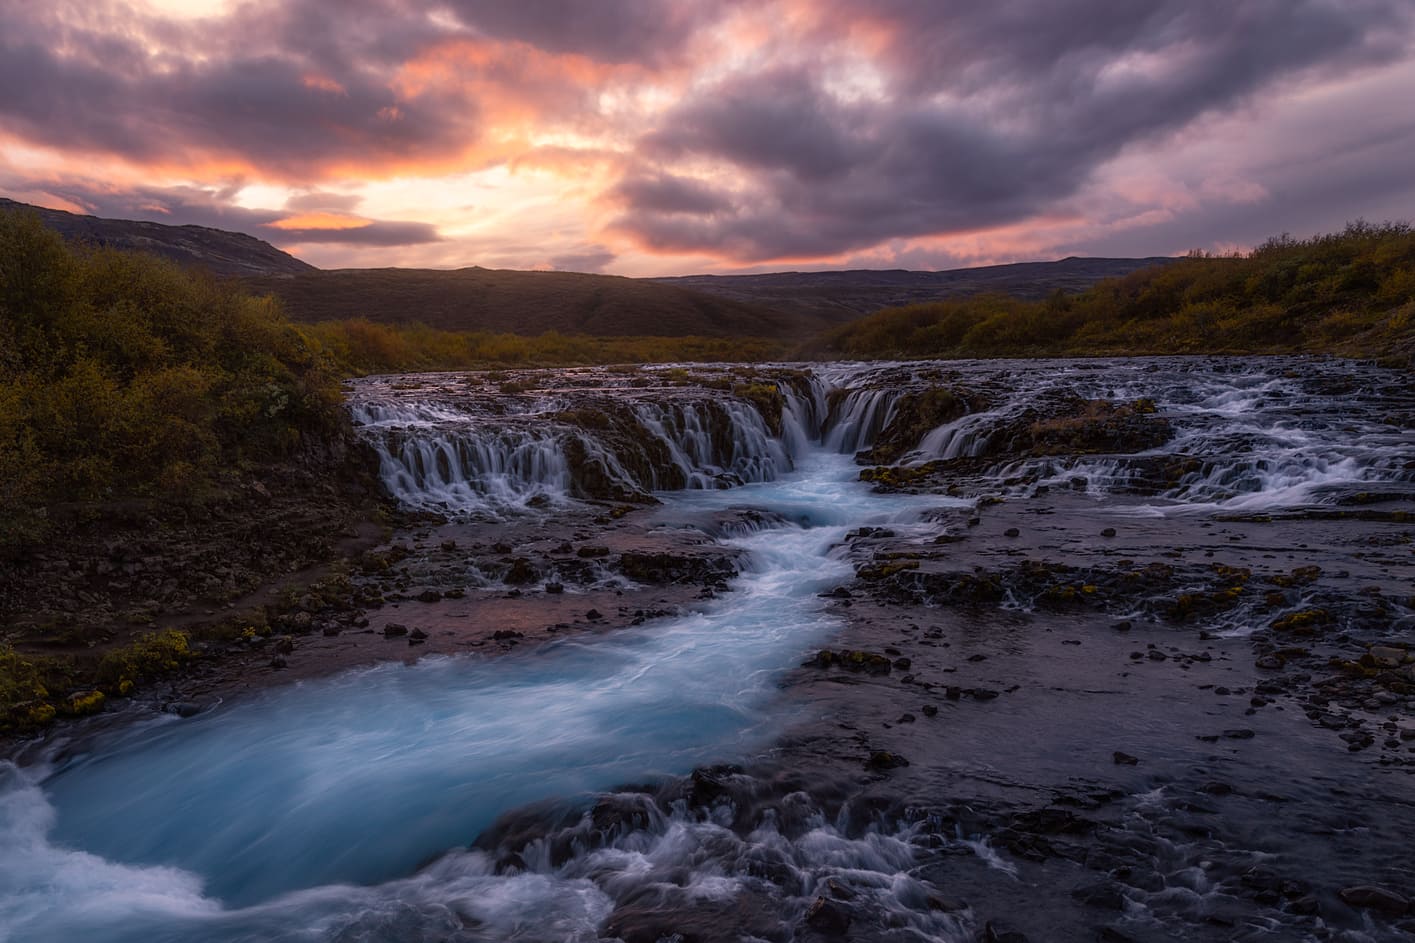 Bruarfoss, the most beautiful waterfall in Iceland